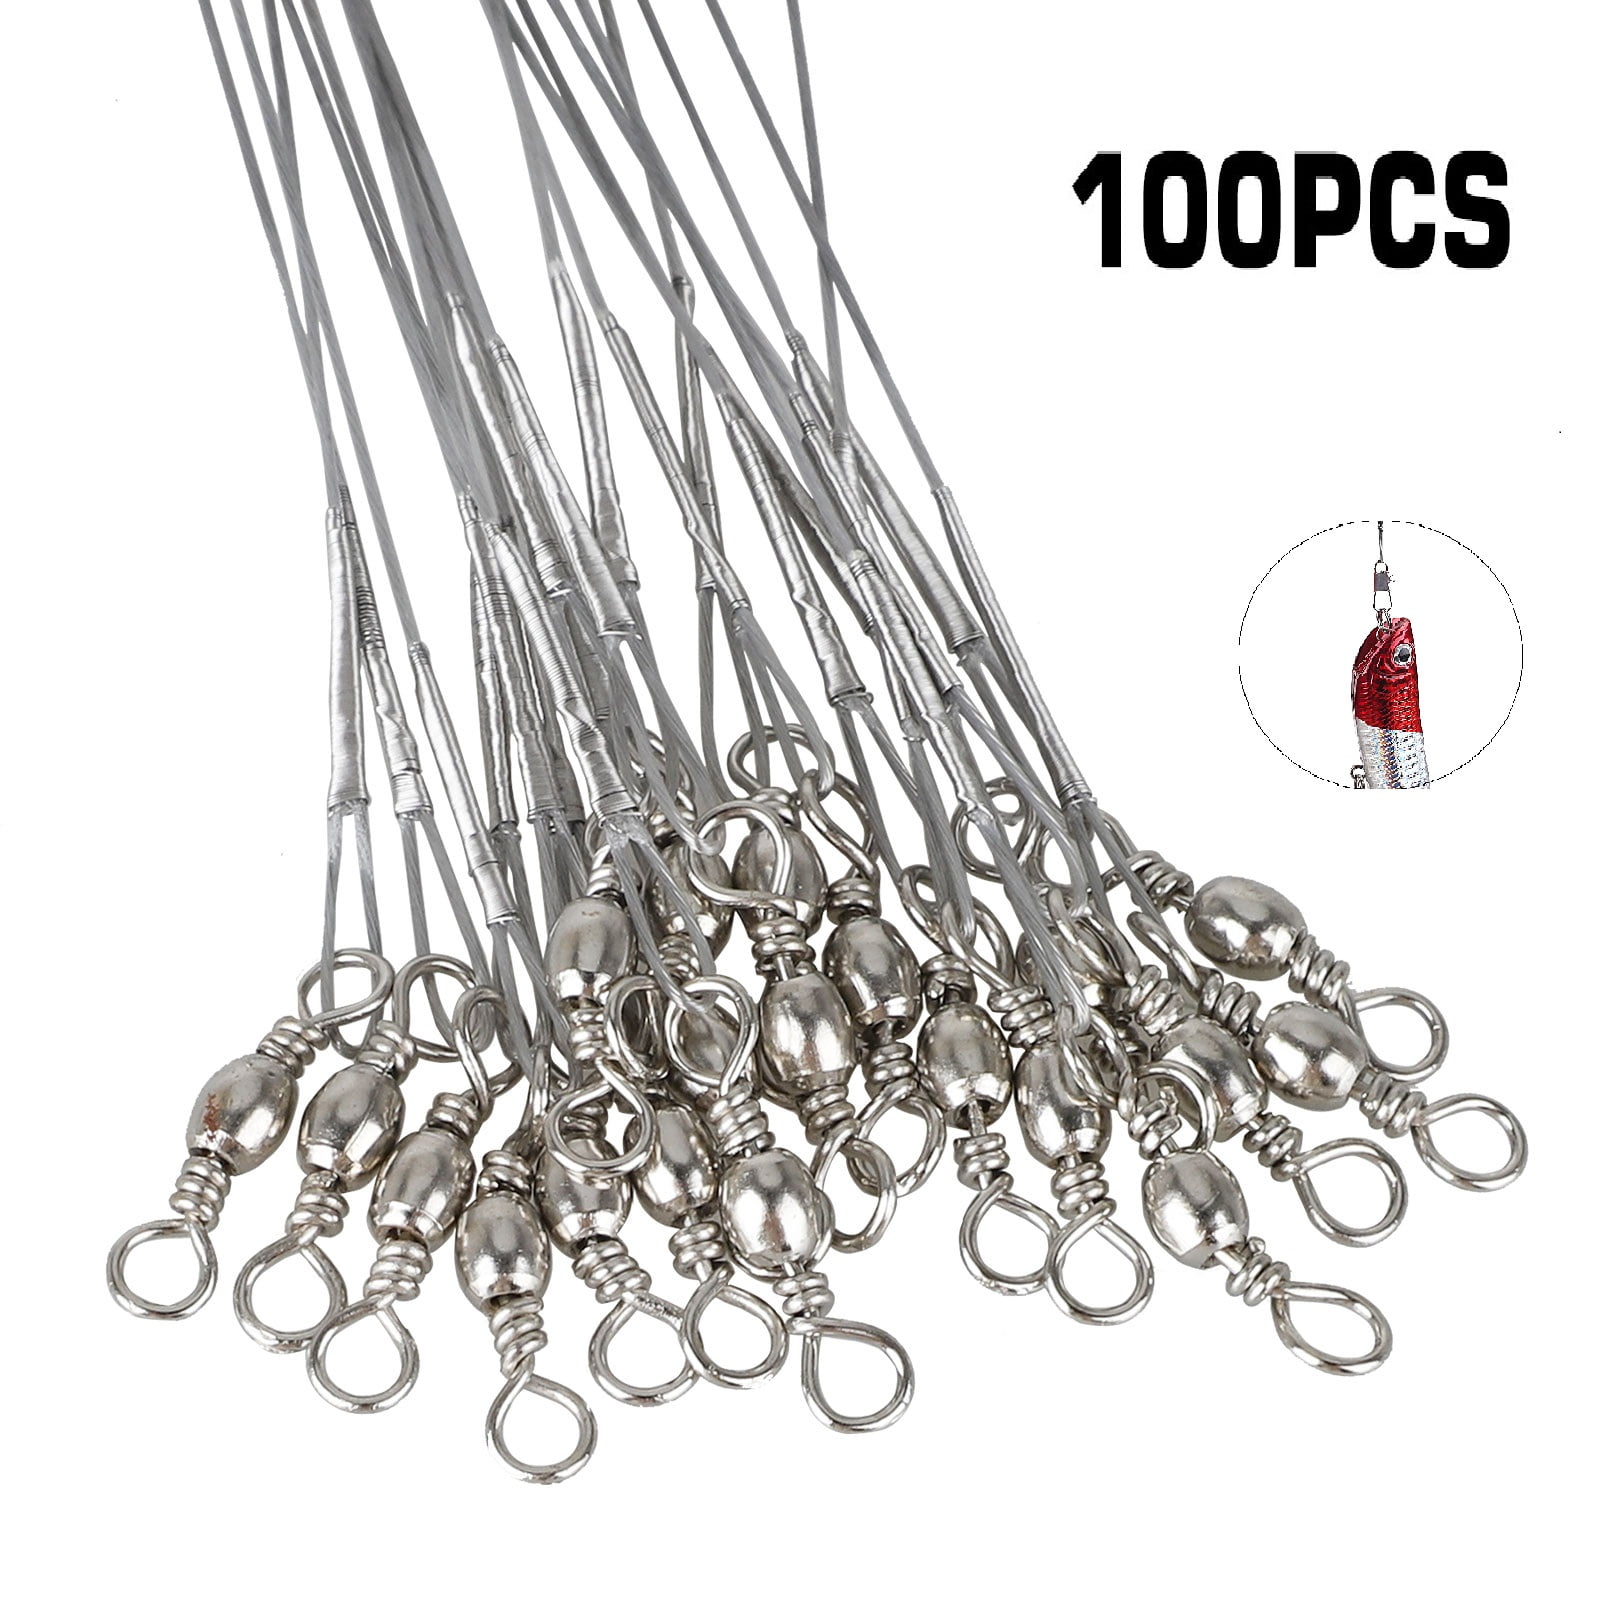 15 PCS STAINLESS STEEL CLEAR WIRE SPINNER LEADER 12",15"18" 140 LBS TEST-5 EA. 